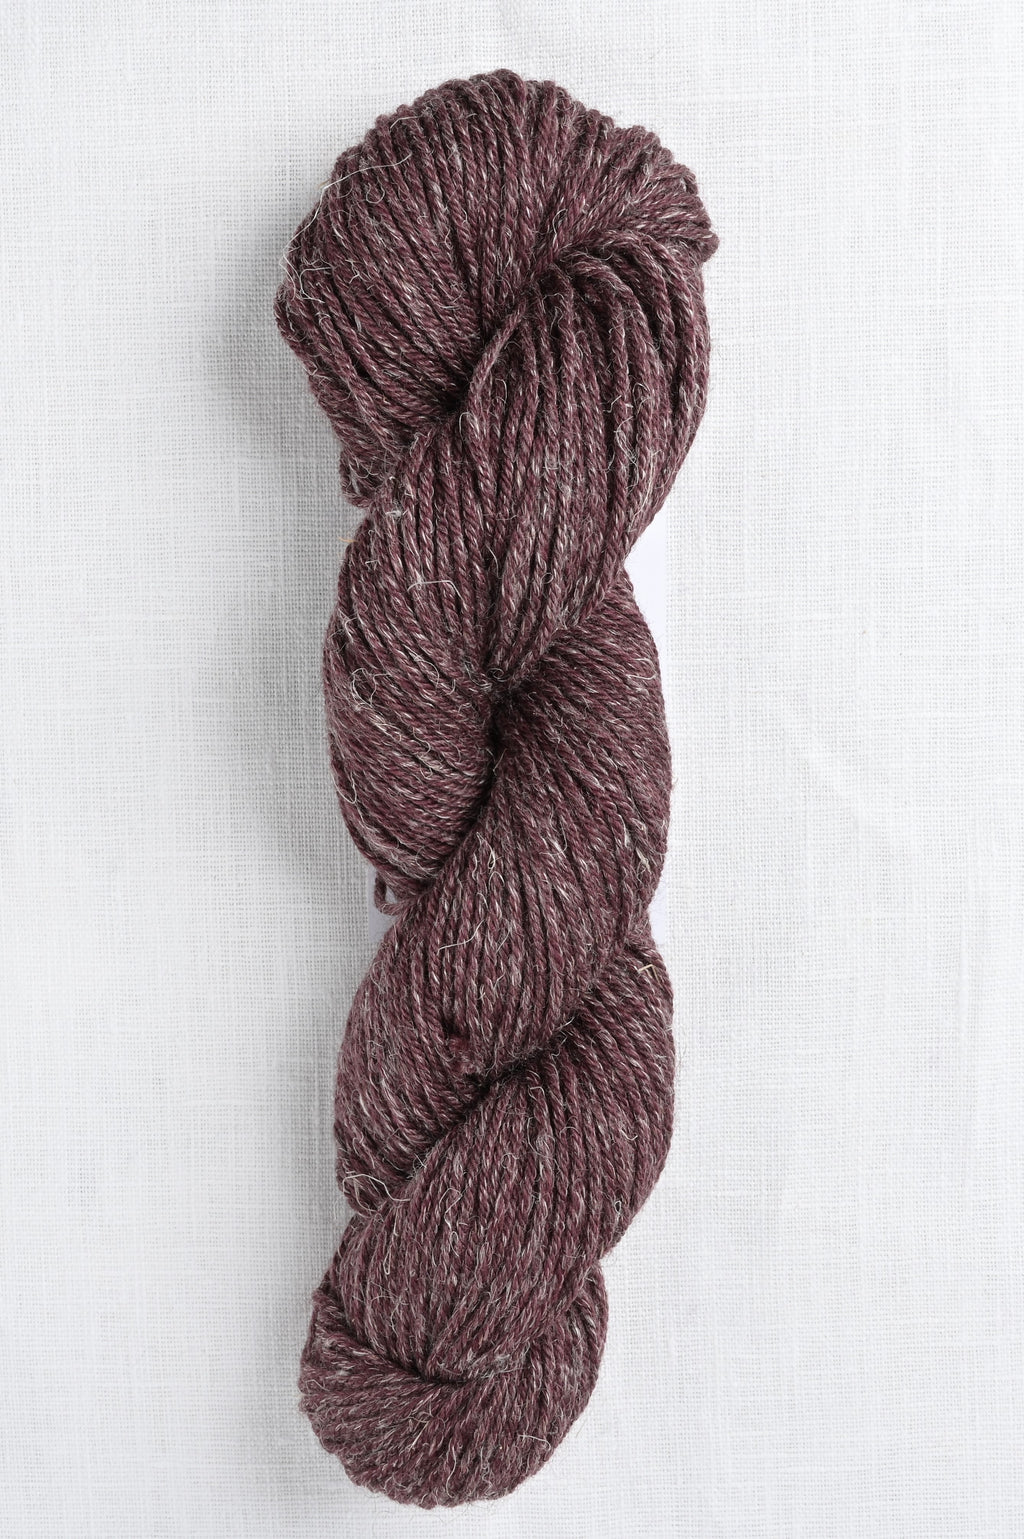 fyberspates stolen stitches nua worsted 9907 chalk and plum